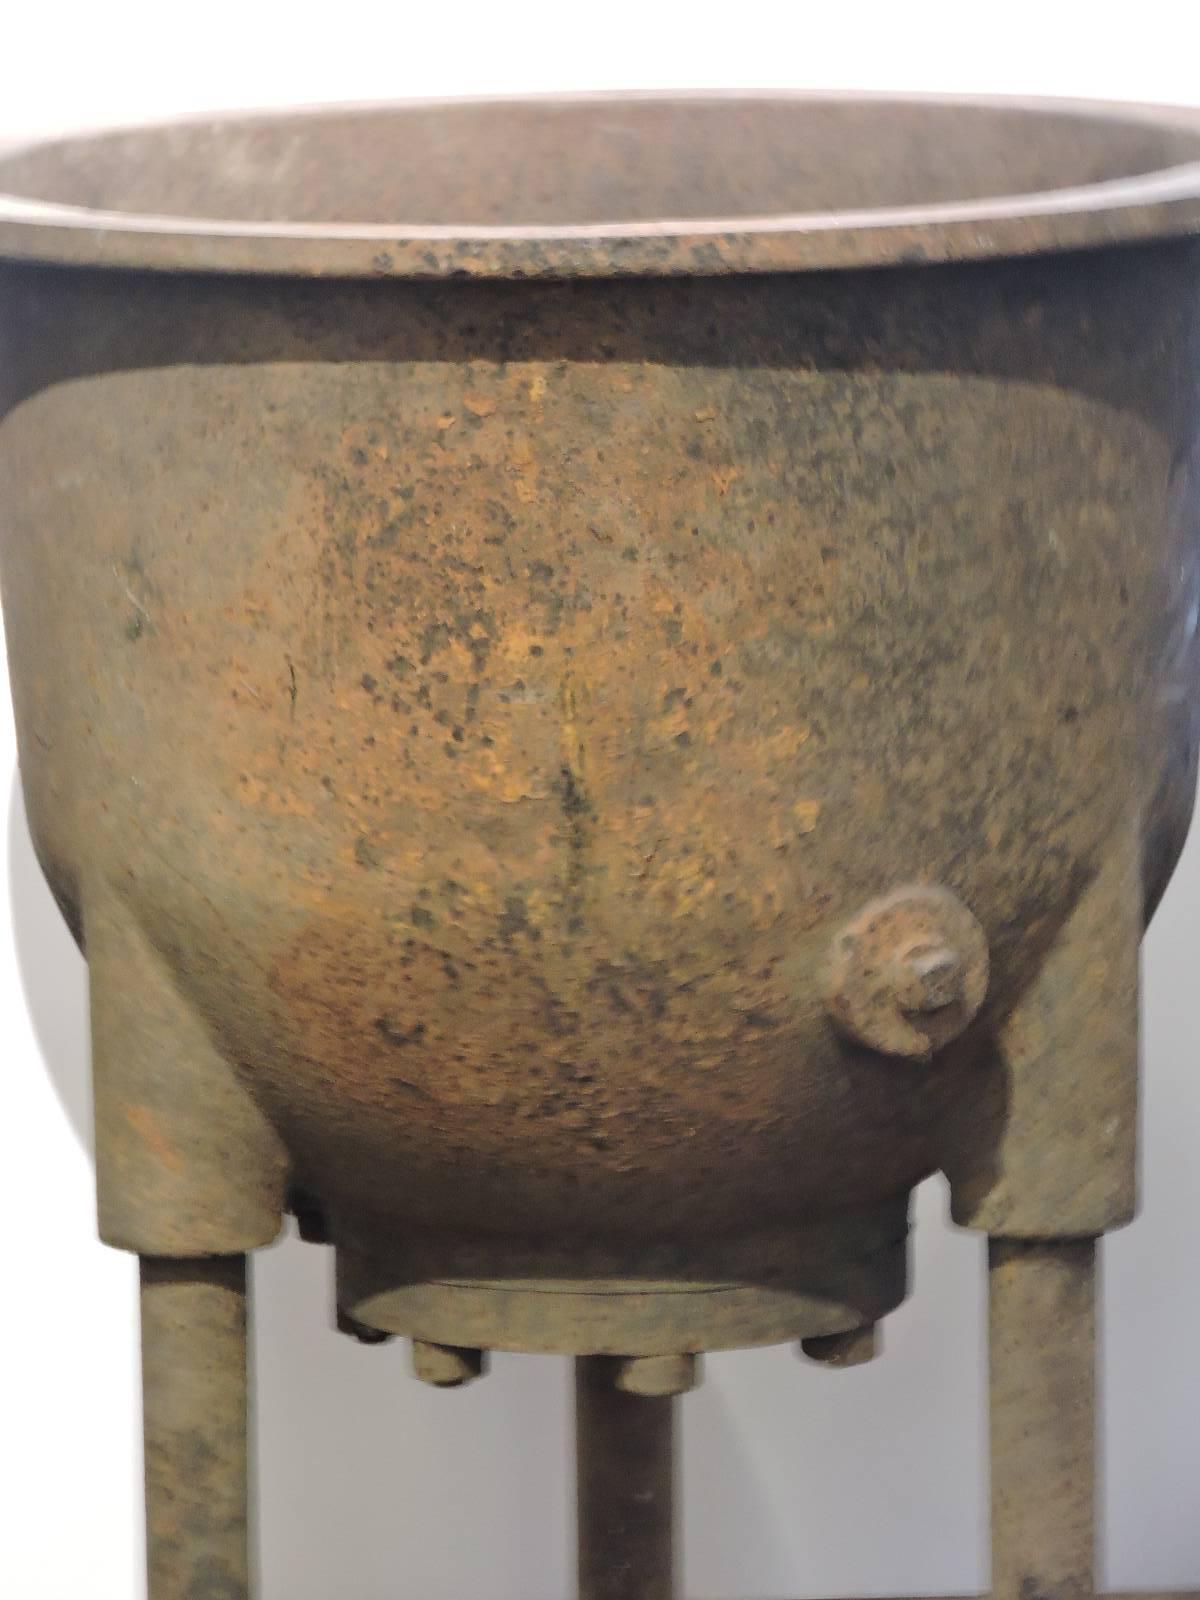 Large and heavy cast iron Industrial factory cauldron raised on three tall footed legs. Manufactured by Sowers - Buffalo, NY (see pictures of copper plate - image numbers 7, 8 and 9). This dates from the early 1900s. There are three available - this